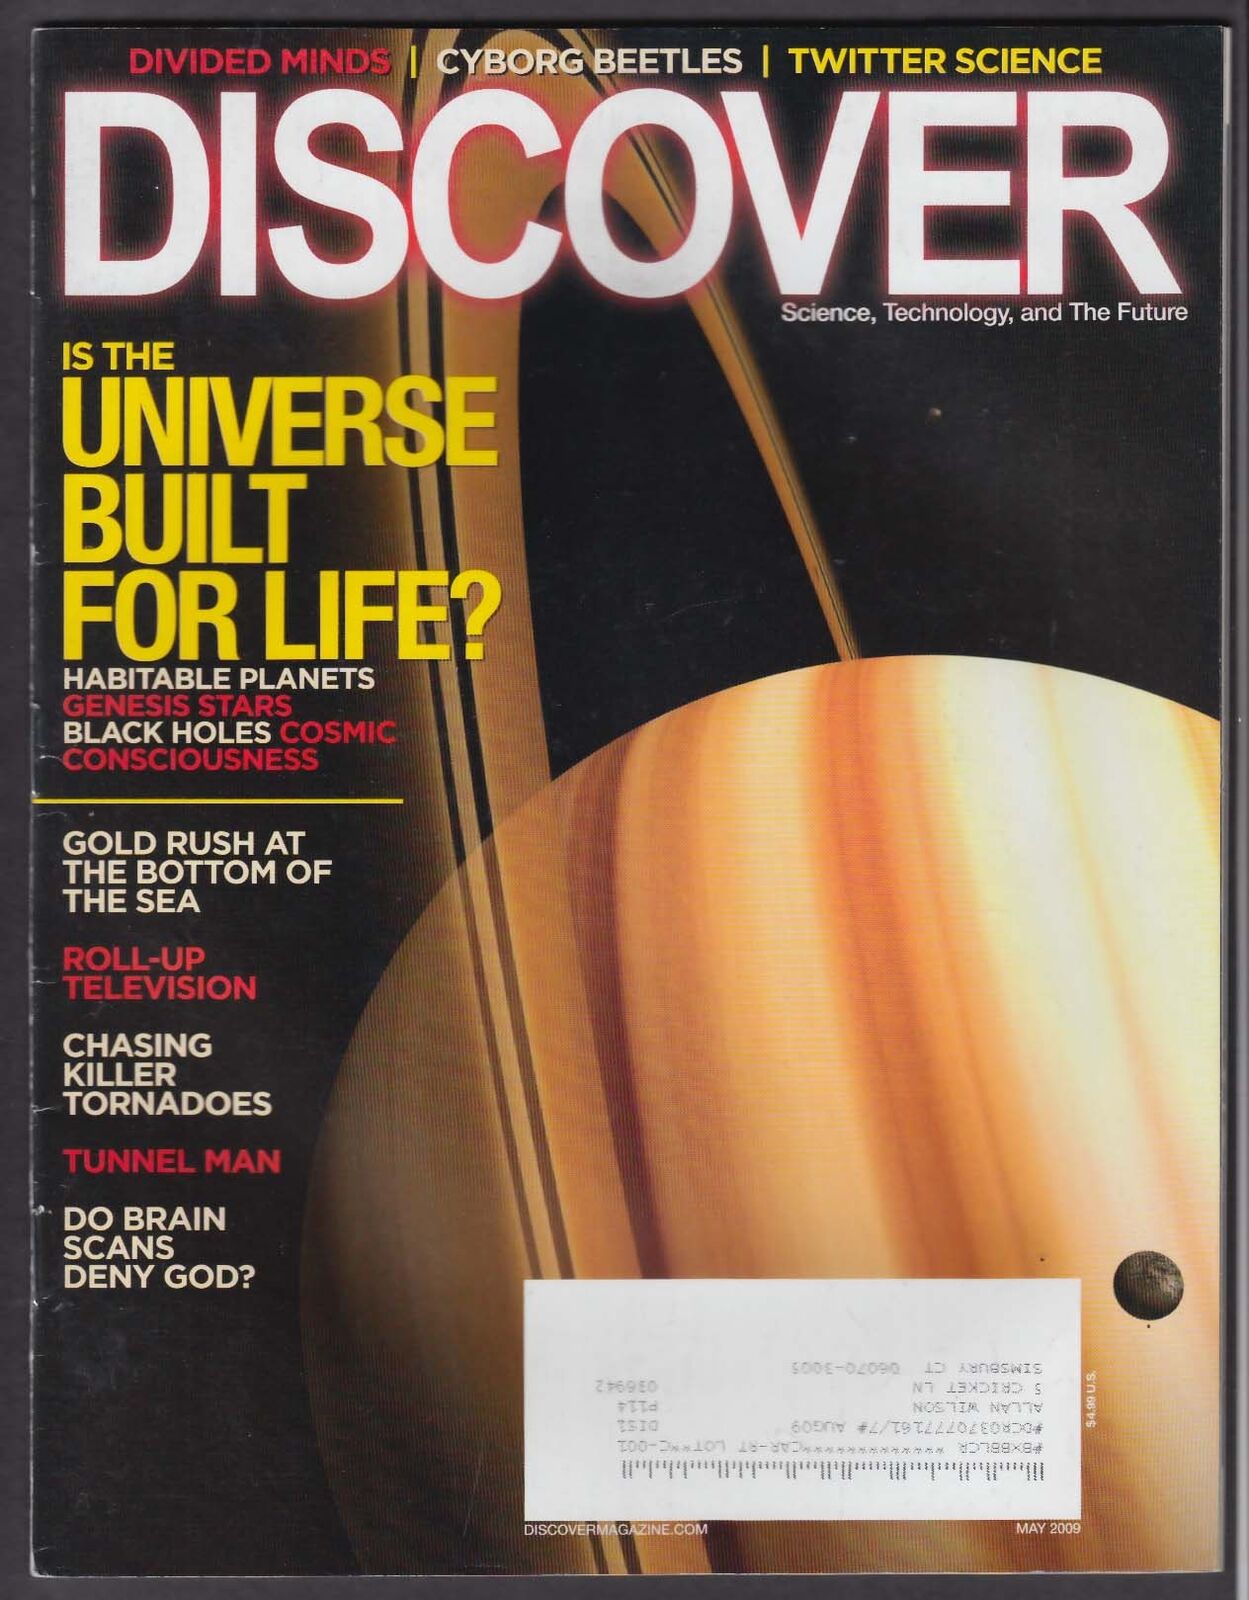 DISCOVER Habitable planets; deep sea gold; tornadoes; tunnels 5 2009